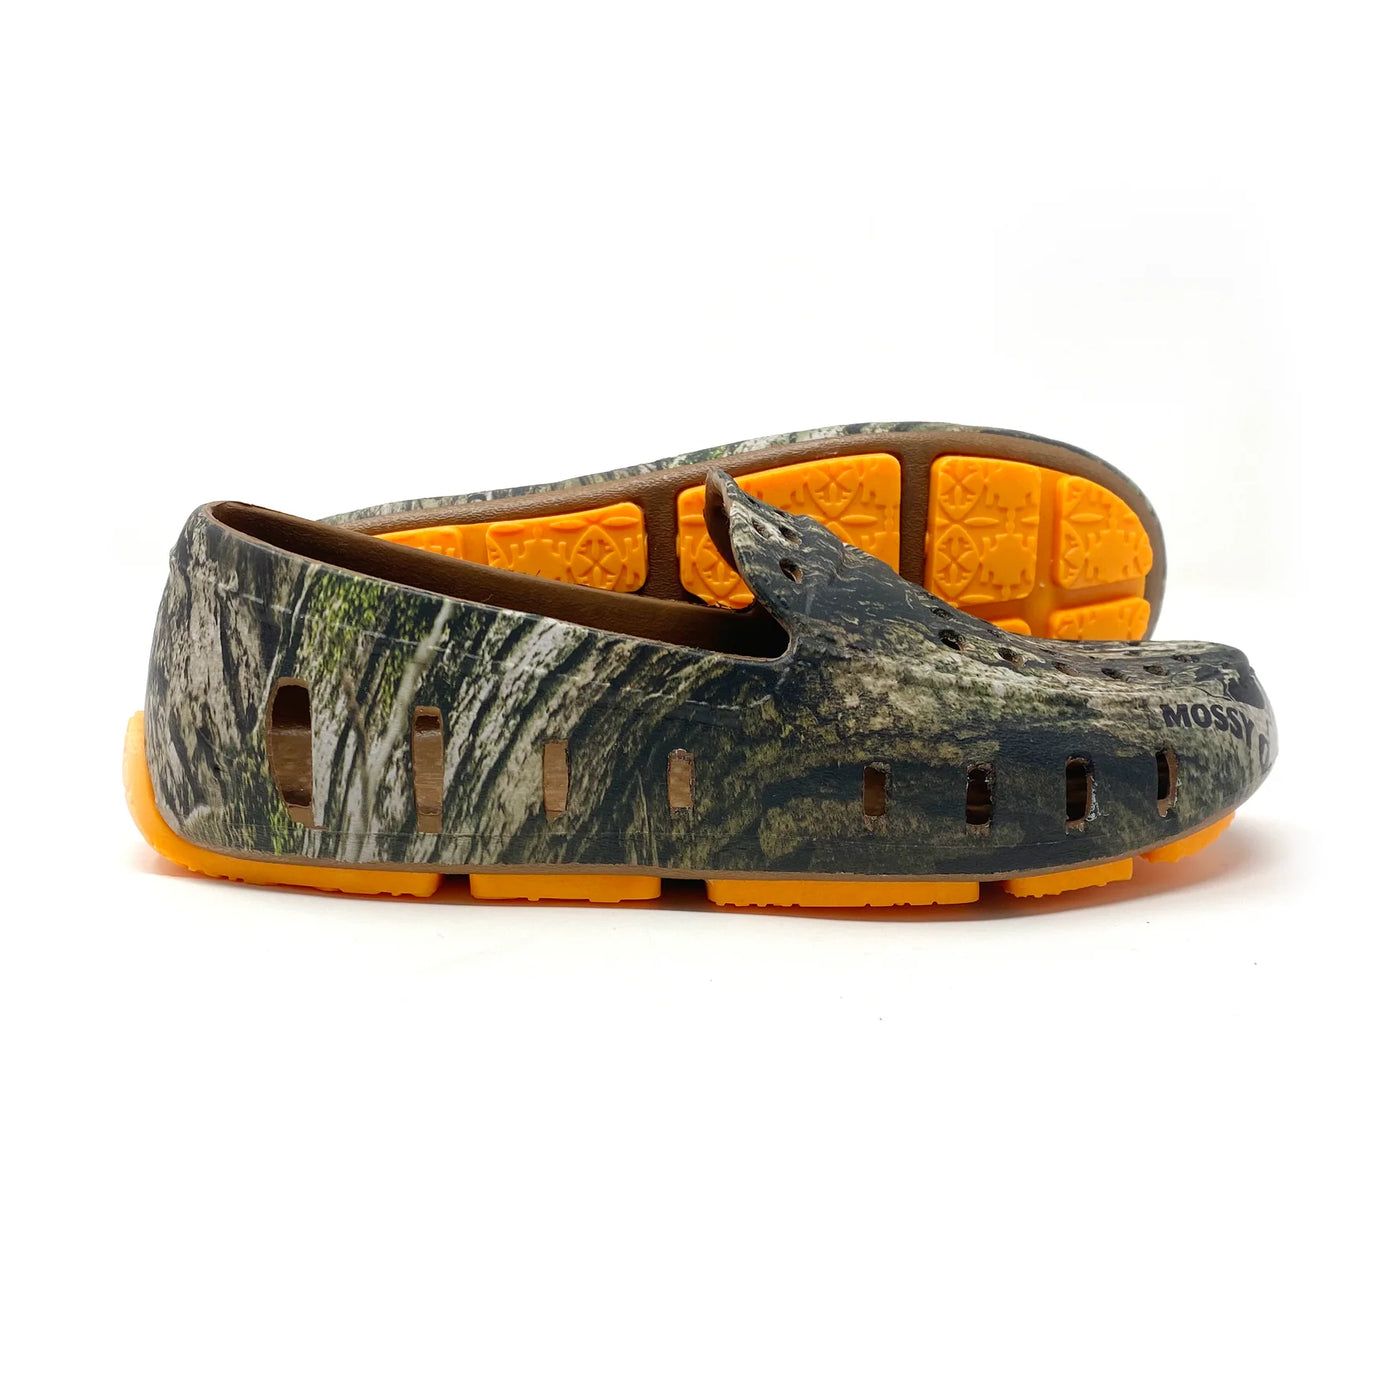 Floafers Prodigy Driver - Mossy Oak Camo